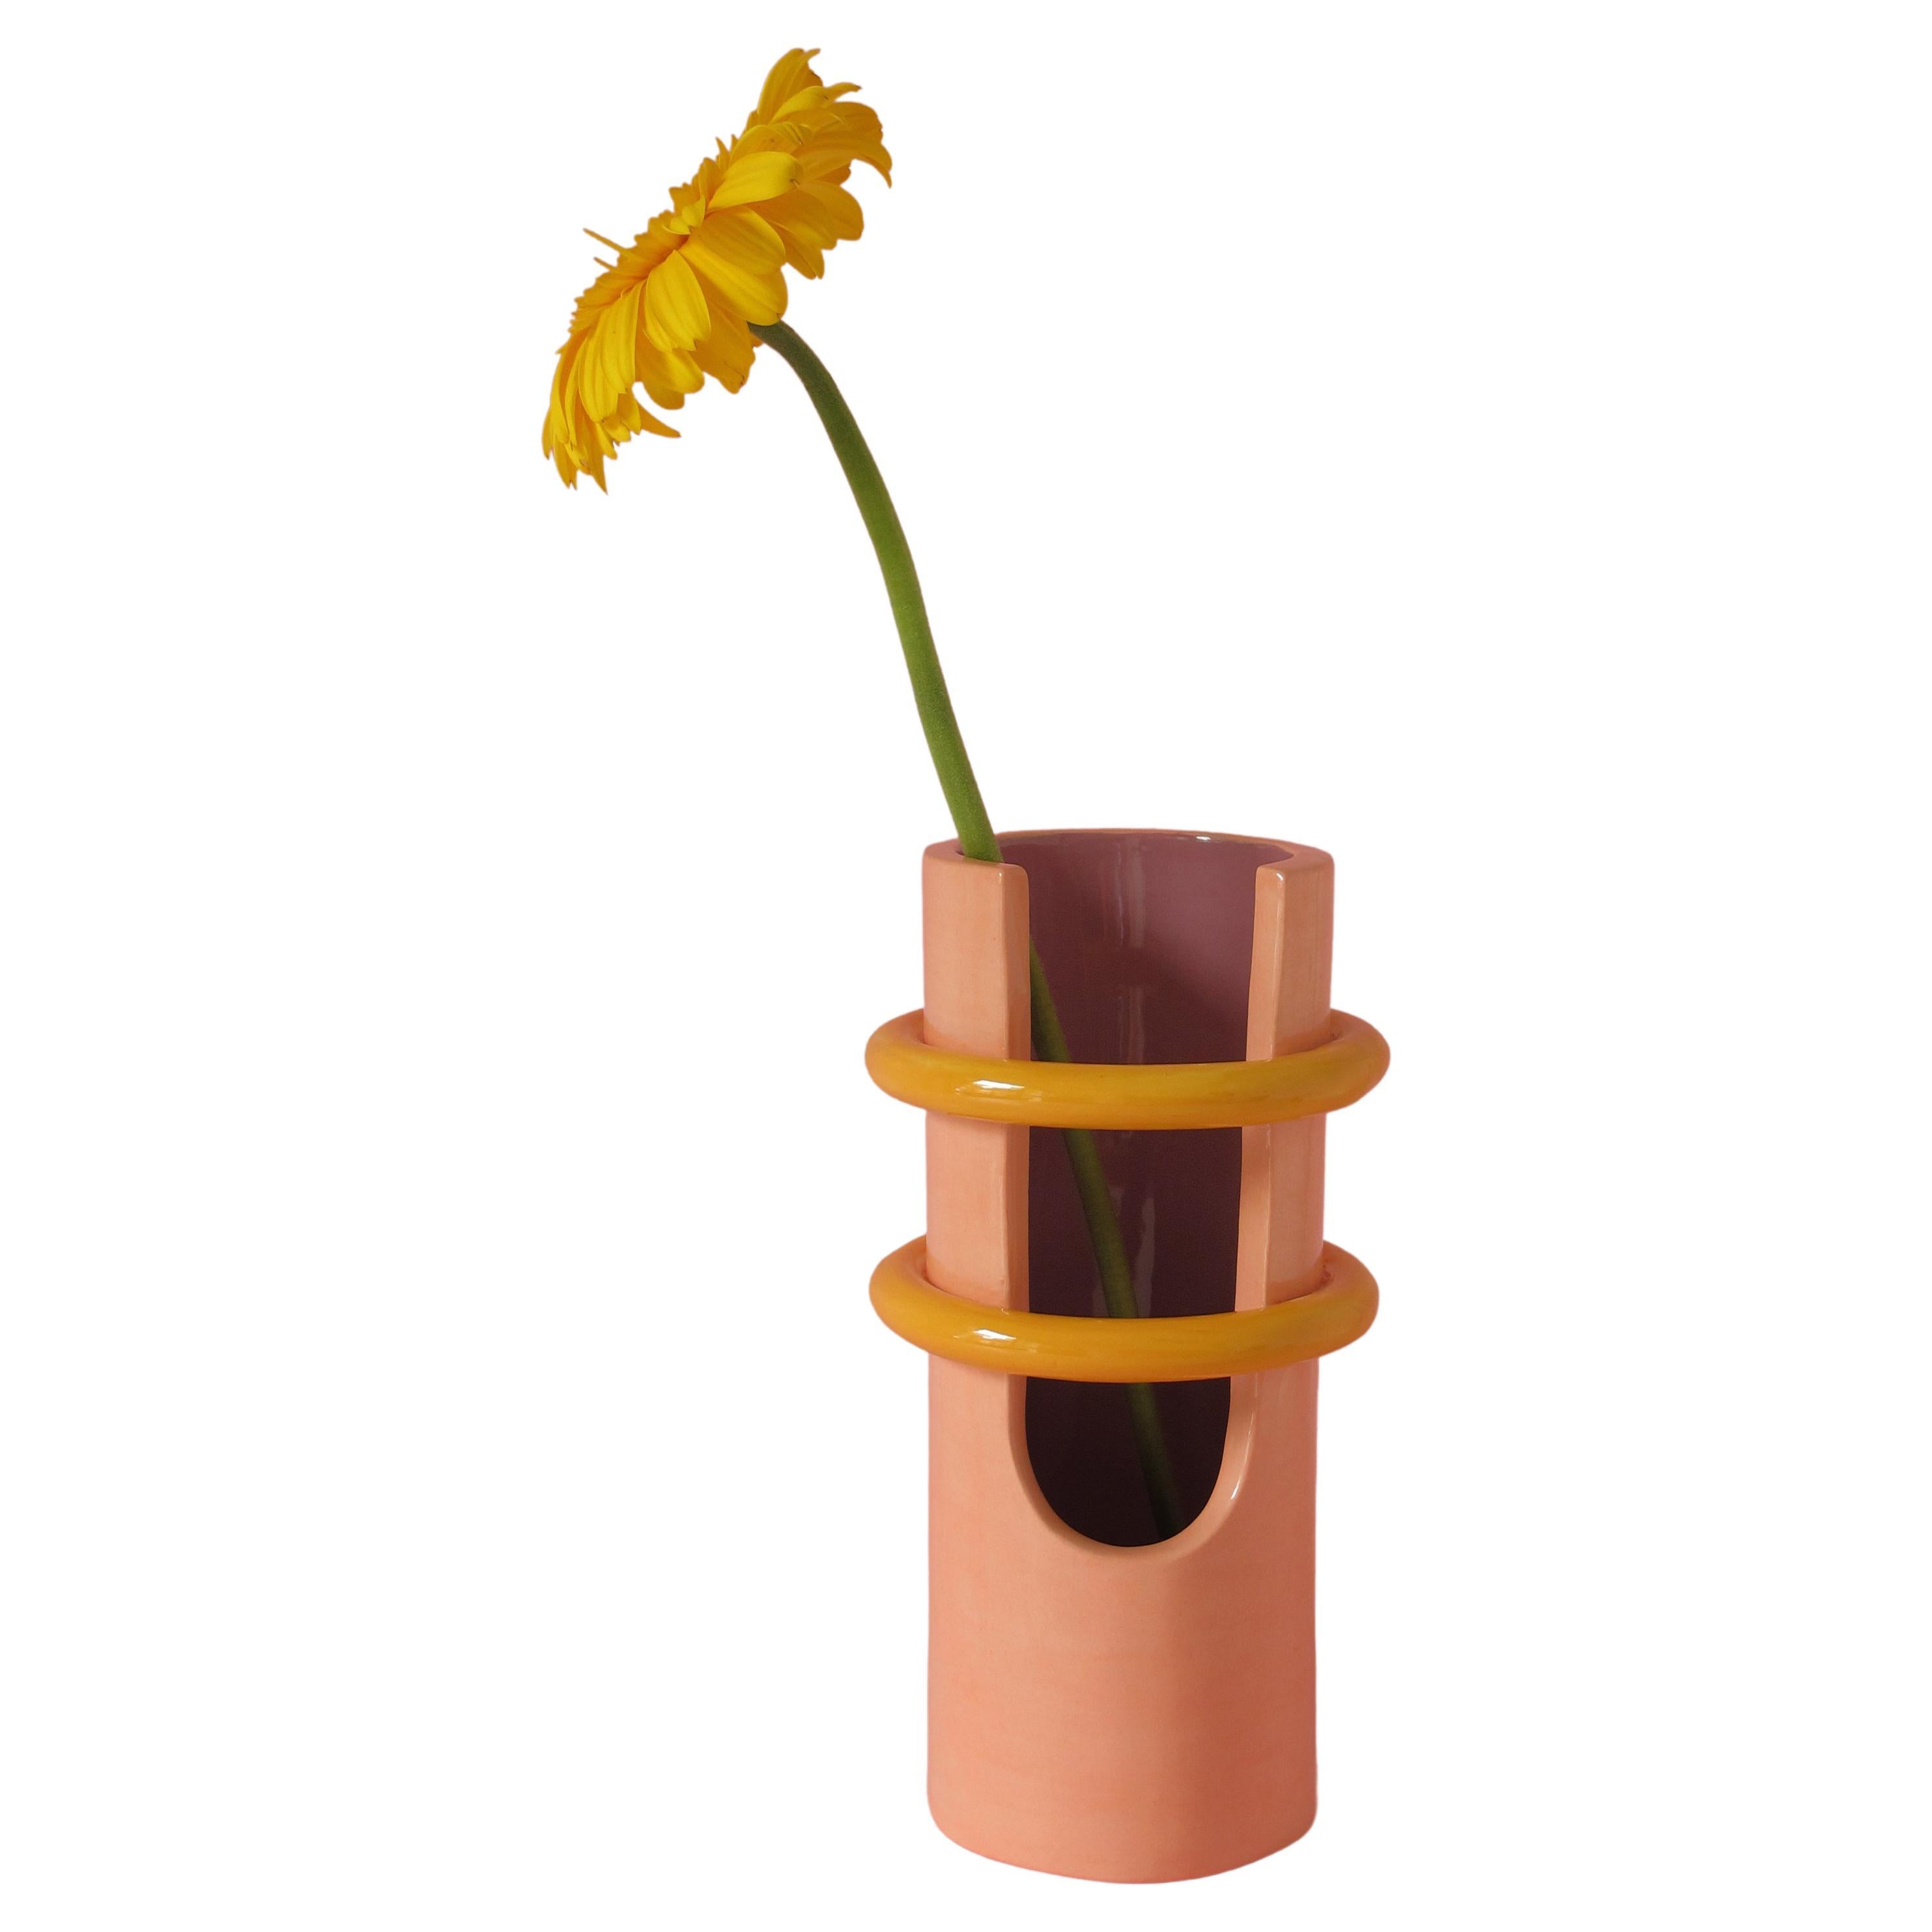 Oro vase by Arianna De Luca
Dimensions: Ø 9 x H 25 cm 
Materials: Ceramic 

Oro is the first piece of the new collection 